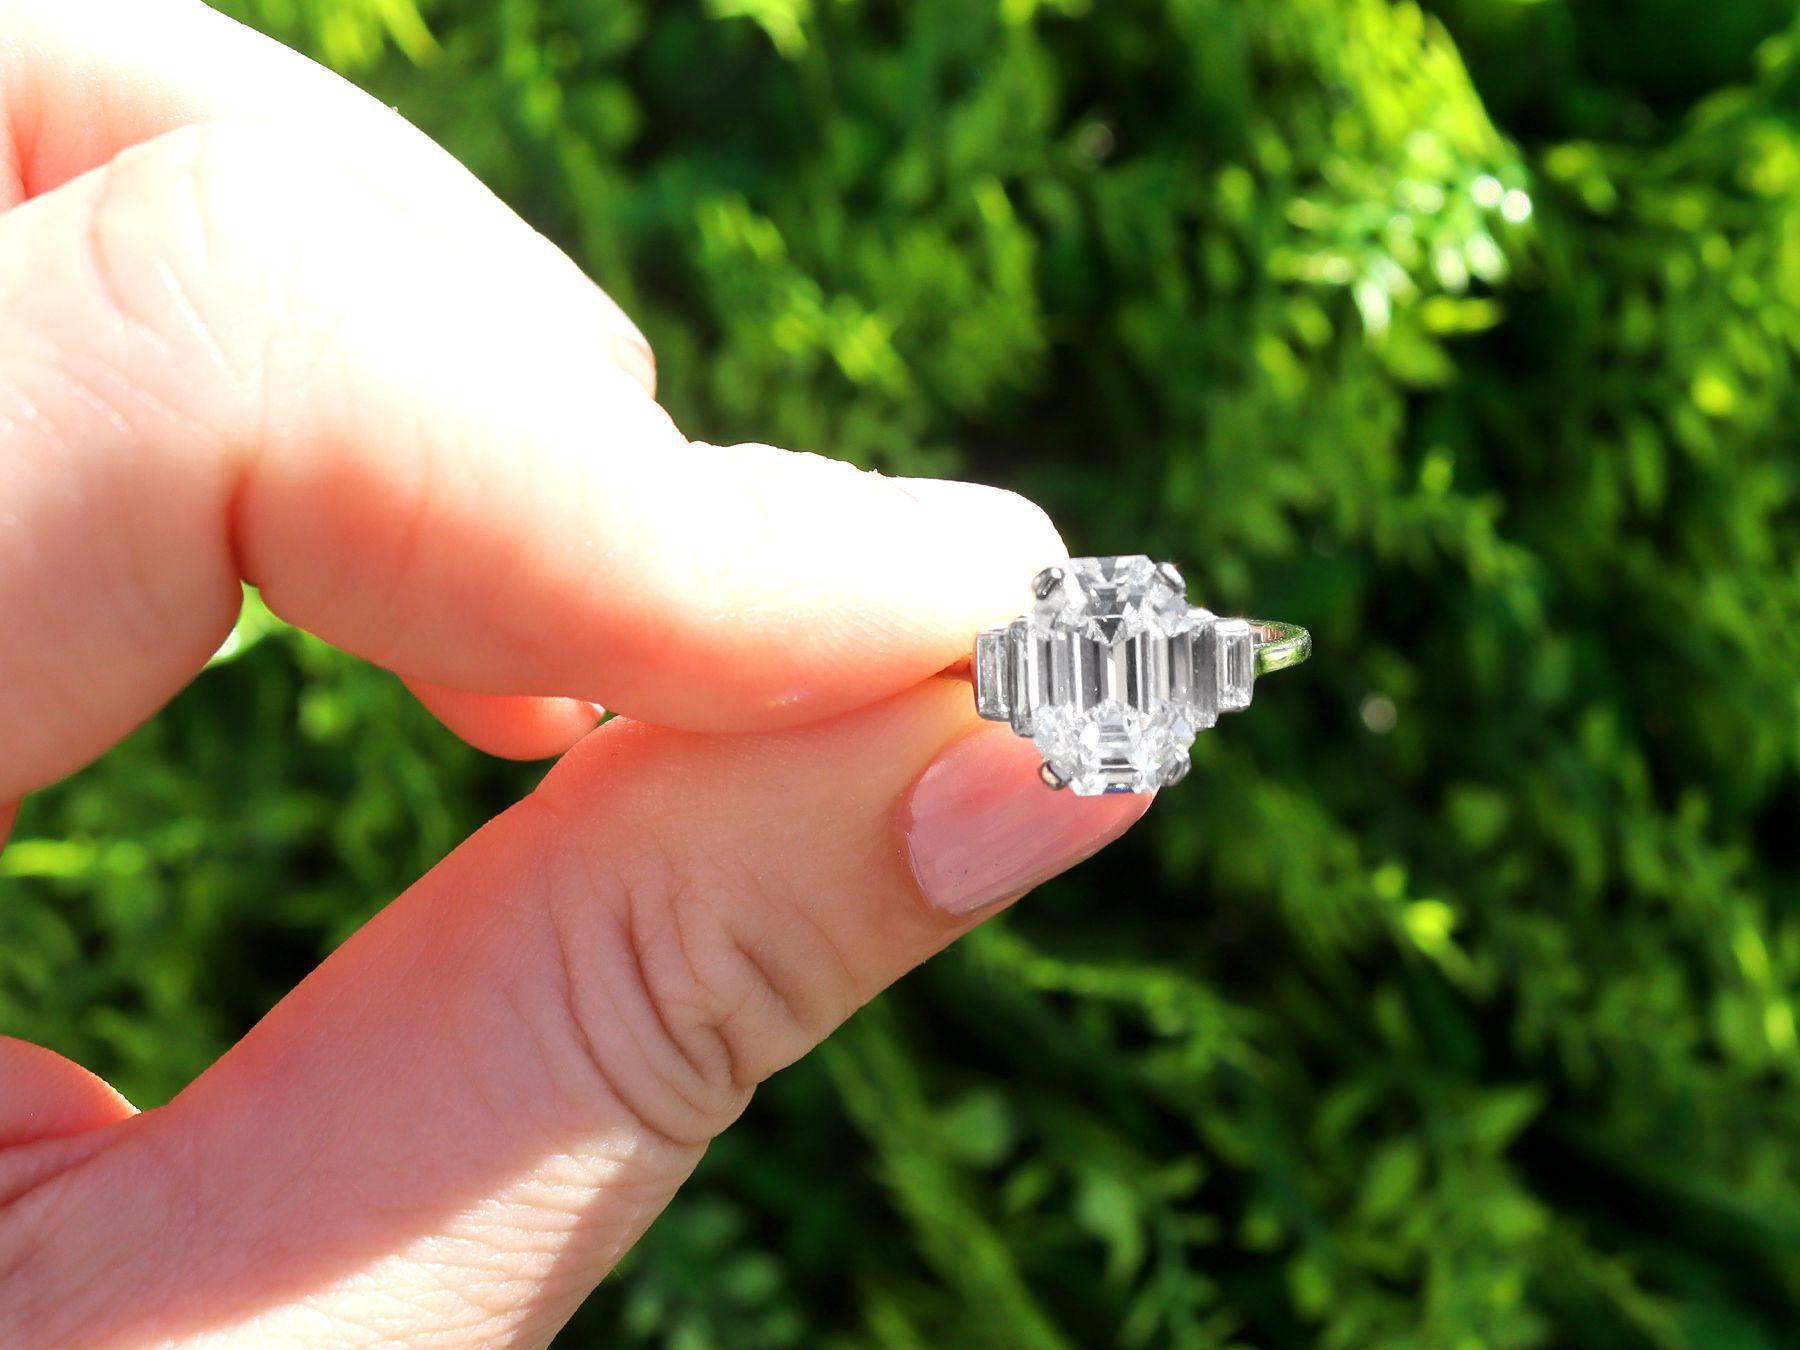 A magnificent, stunning, fine and impressive antique 4.02 carat emerald cut diamond solitaire ring in platinum; part of our antique engagement ring collections.

This stunning, fine and impressive antique diamond ring has been crafted in